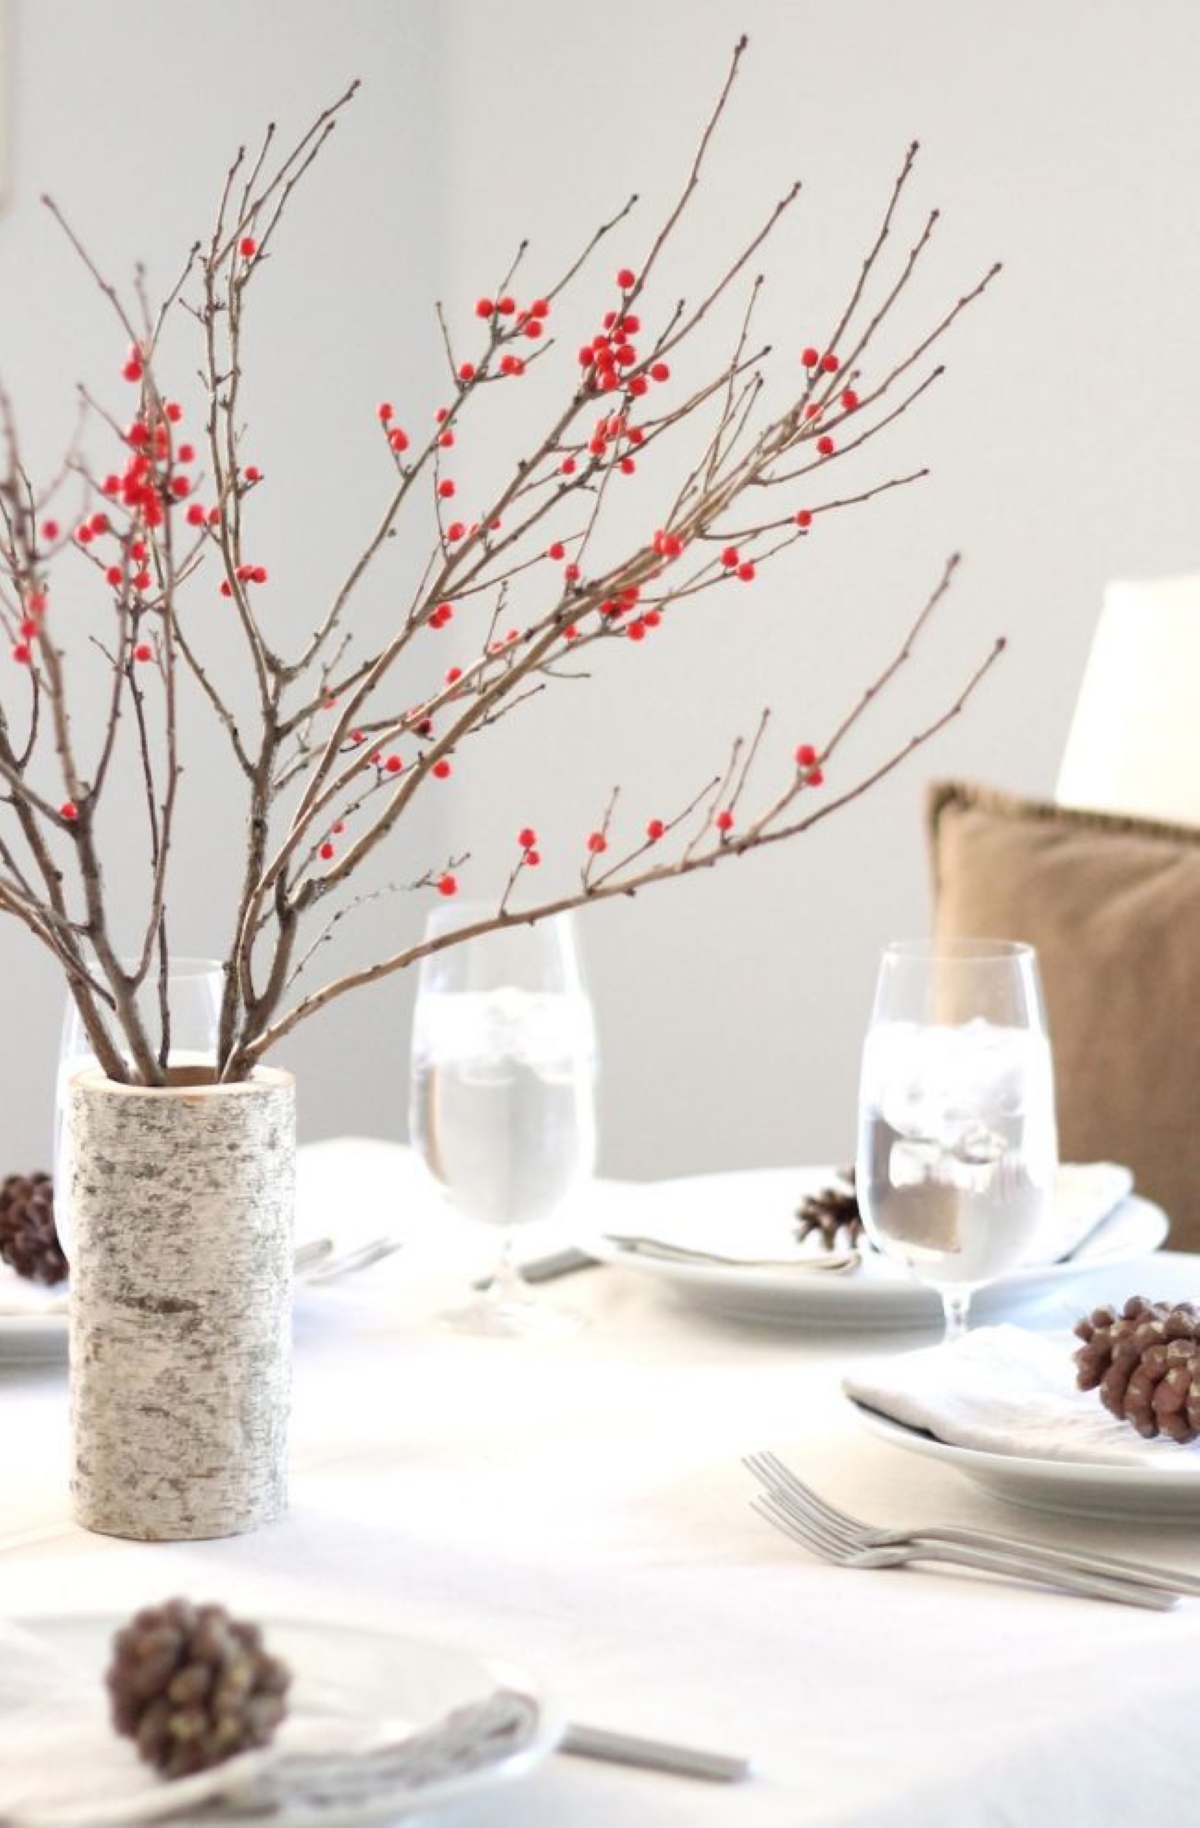 A birch vase on a dining table red berry branches inside.